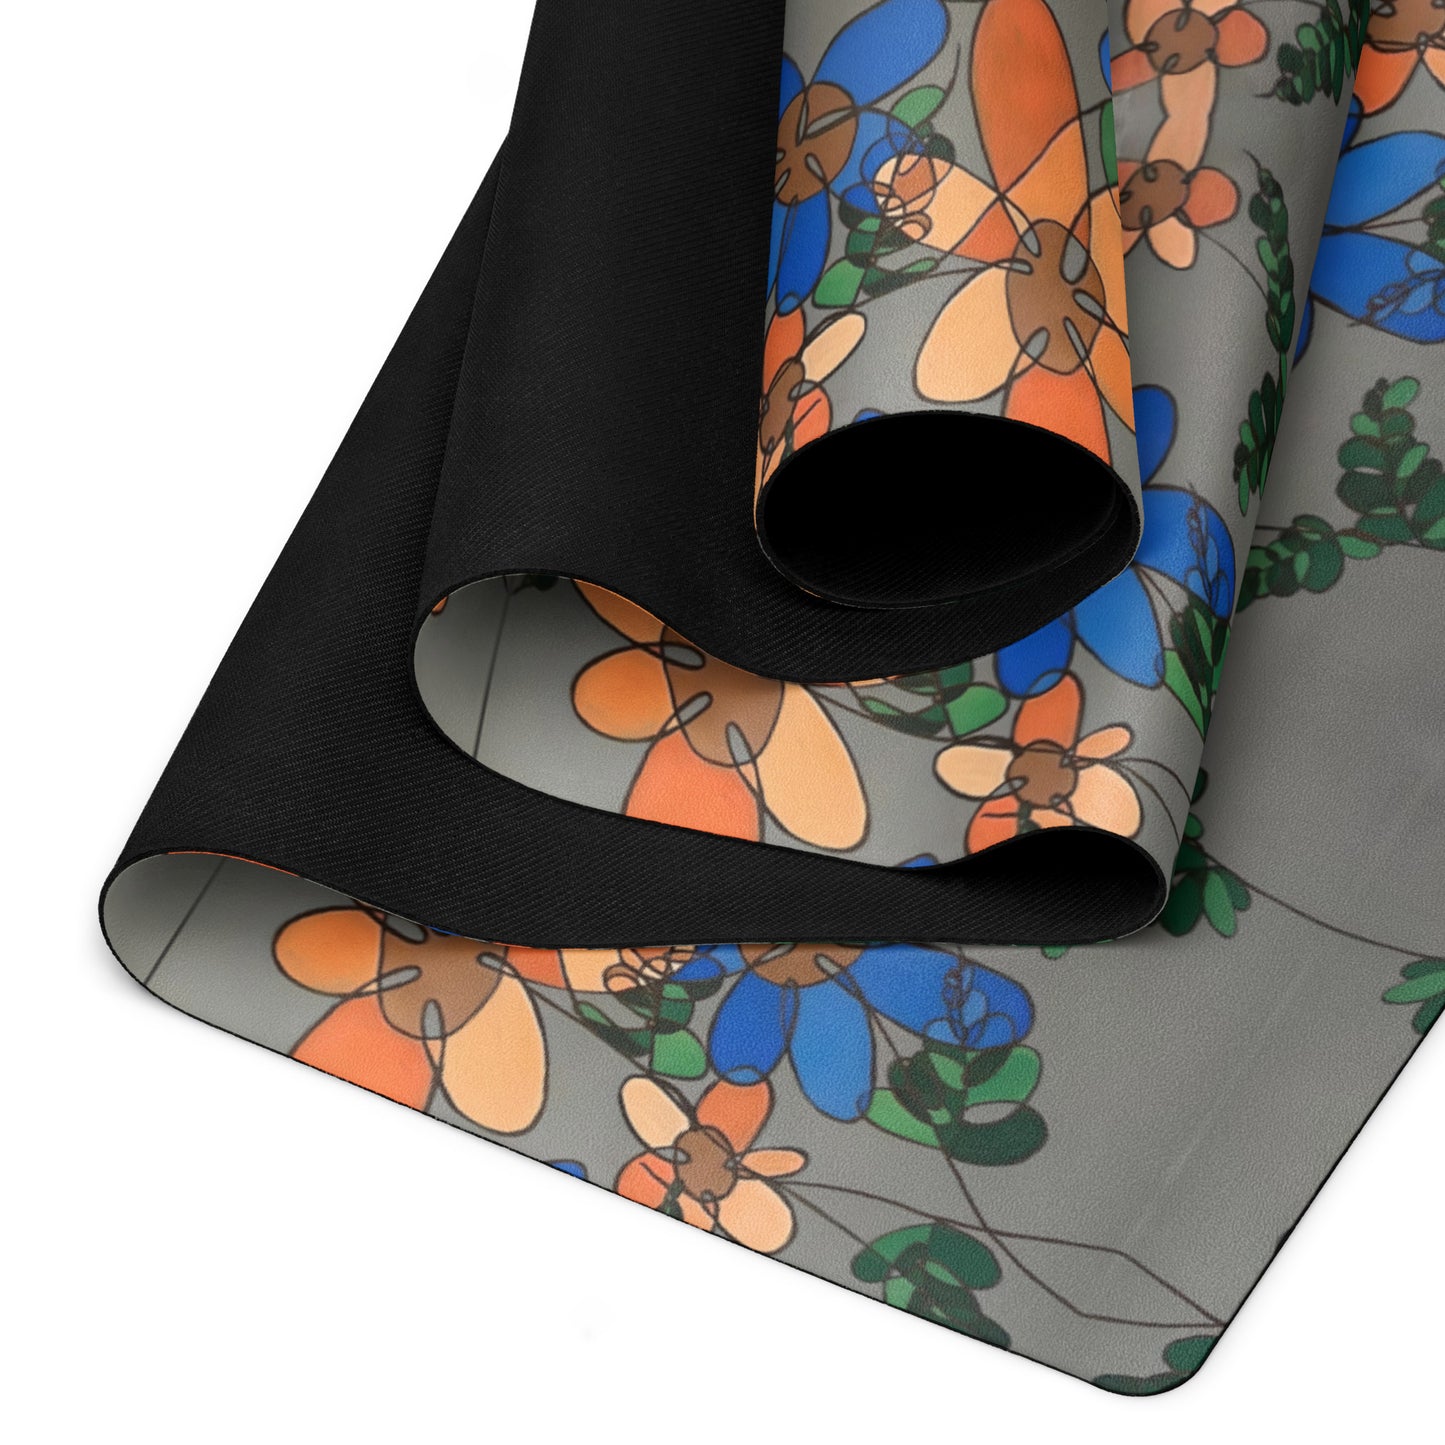 Abstract Flowers in Orange and Blue Yoga mat